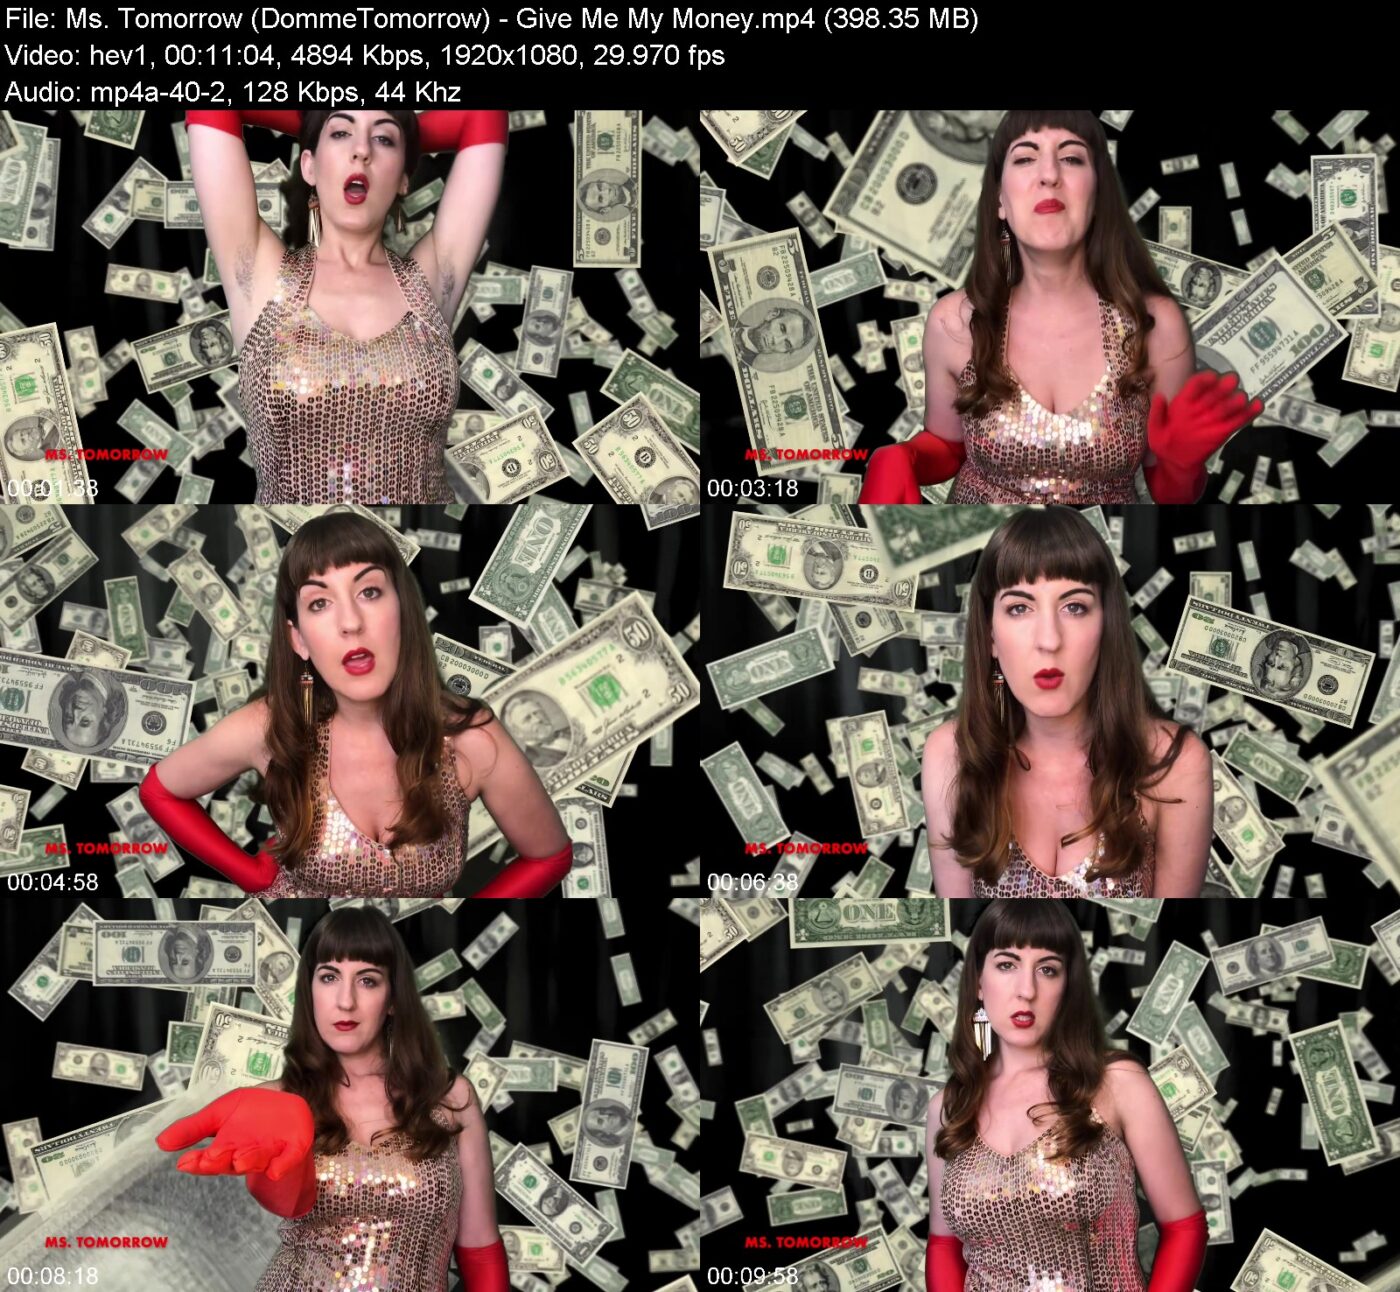 Ms. Tomorrow (DommeTomorrow) in Give Me My Money